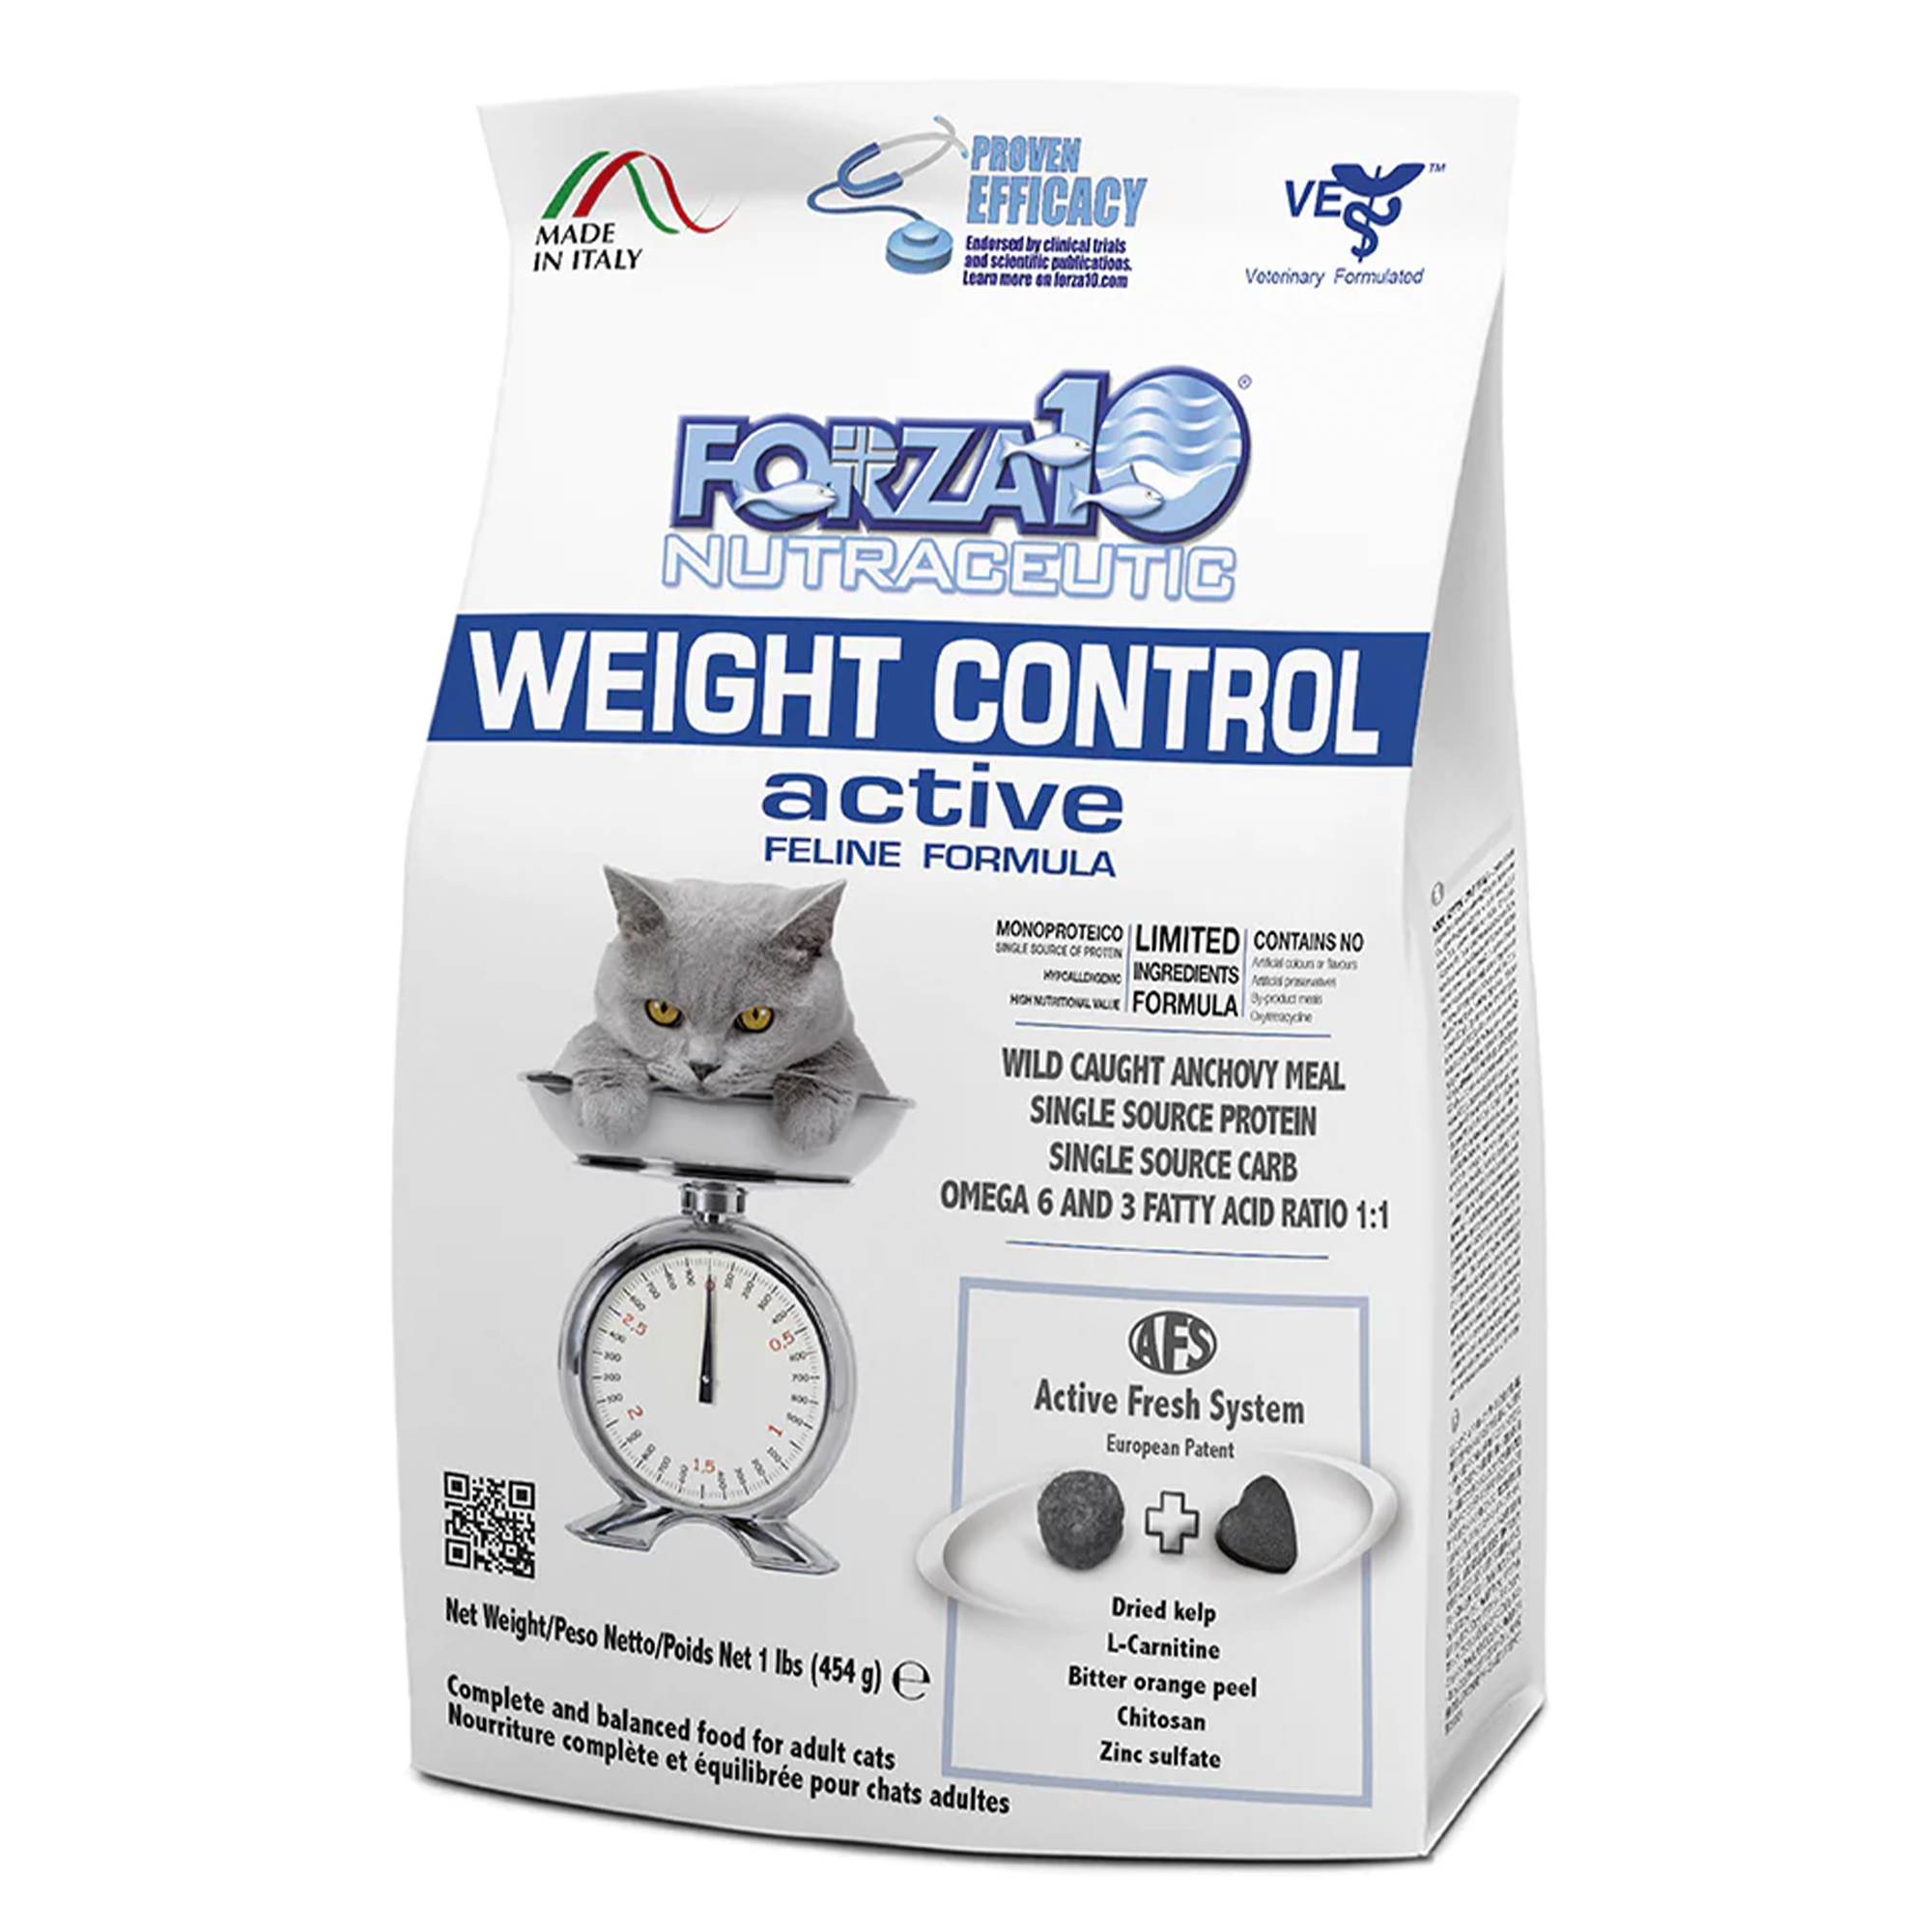 Forza10 Nutraceutic Active Weight Control Diet Dry Cat Food Usage